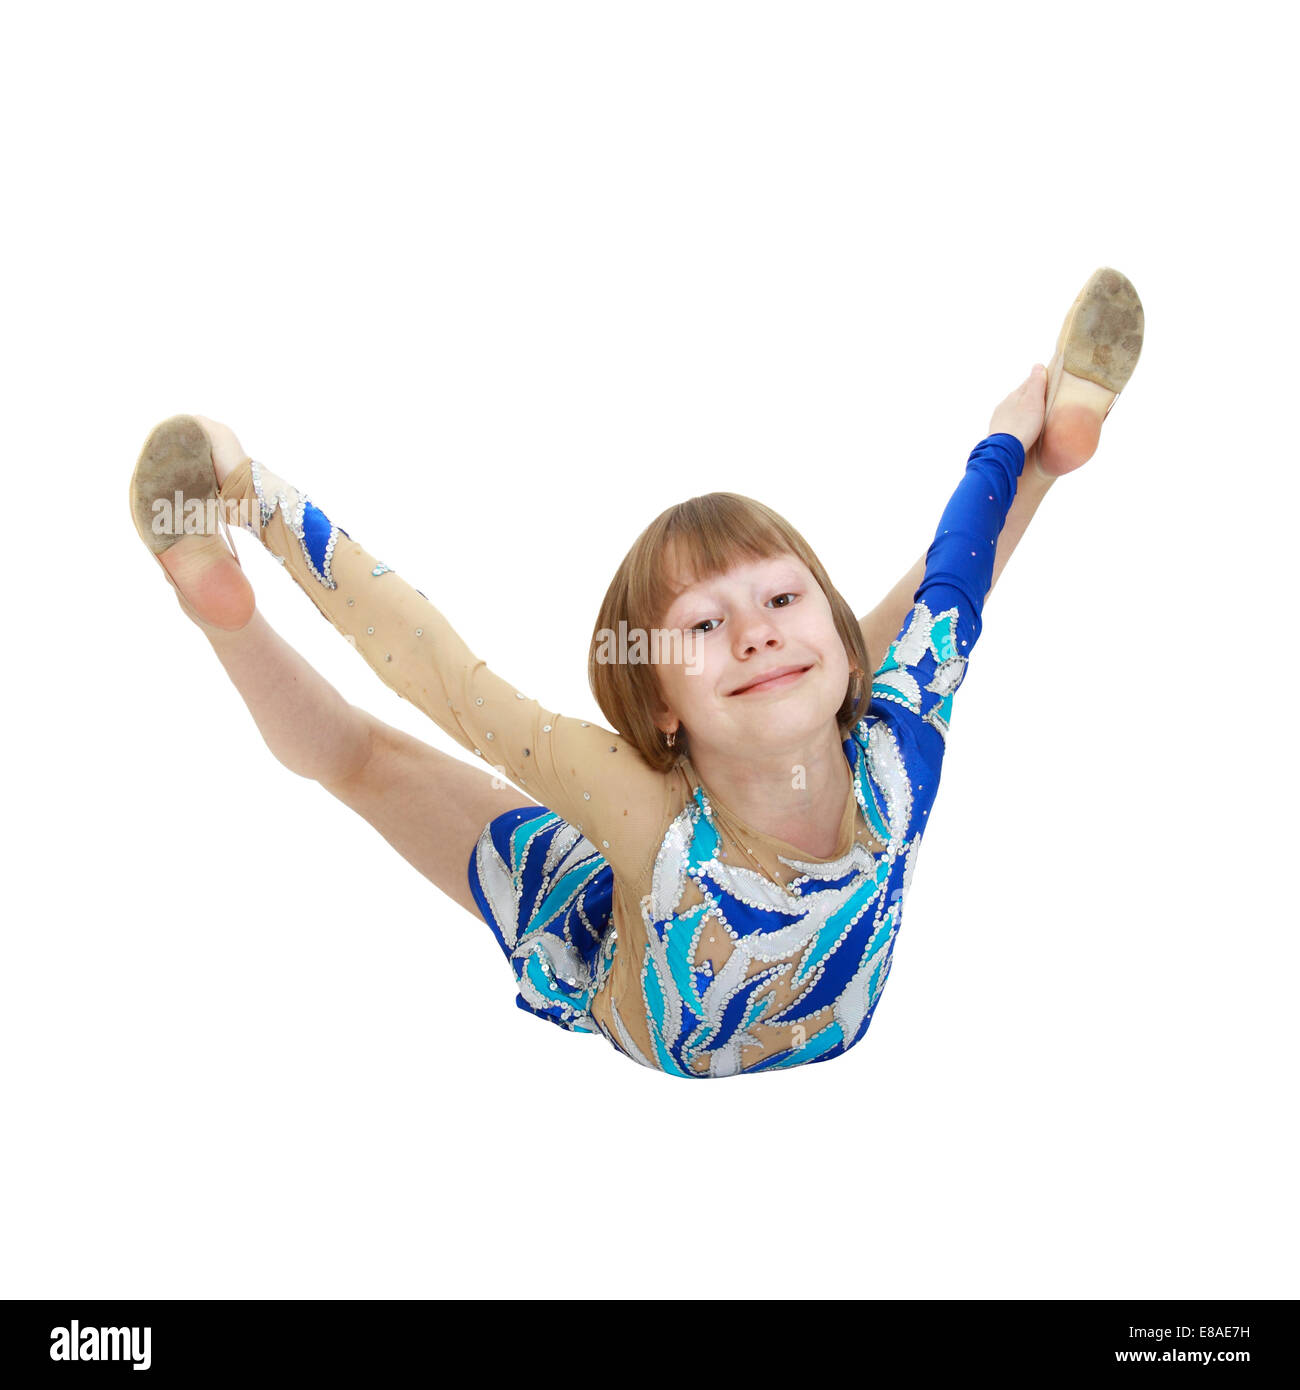 Girl in gymnastic exercise position isolated on white background Stock Photo